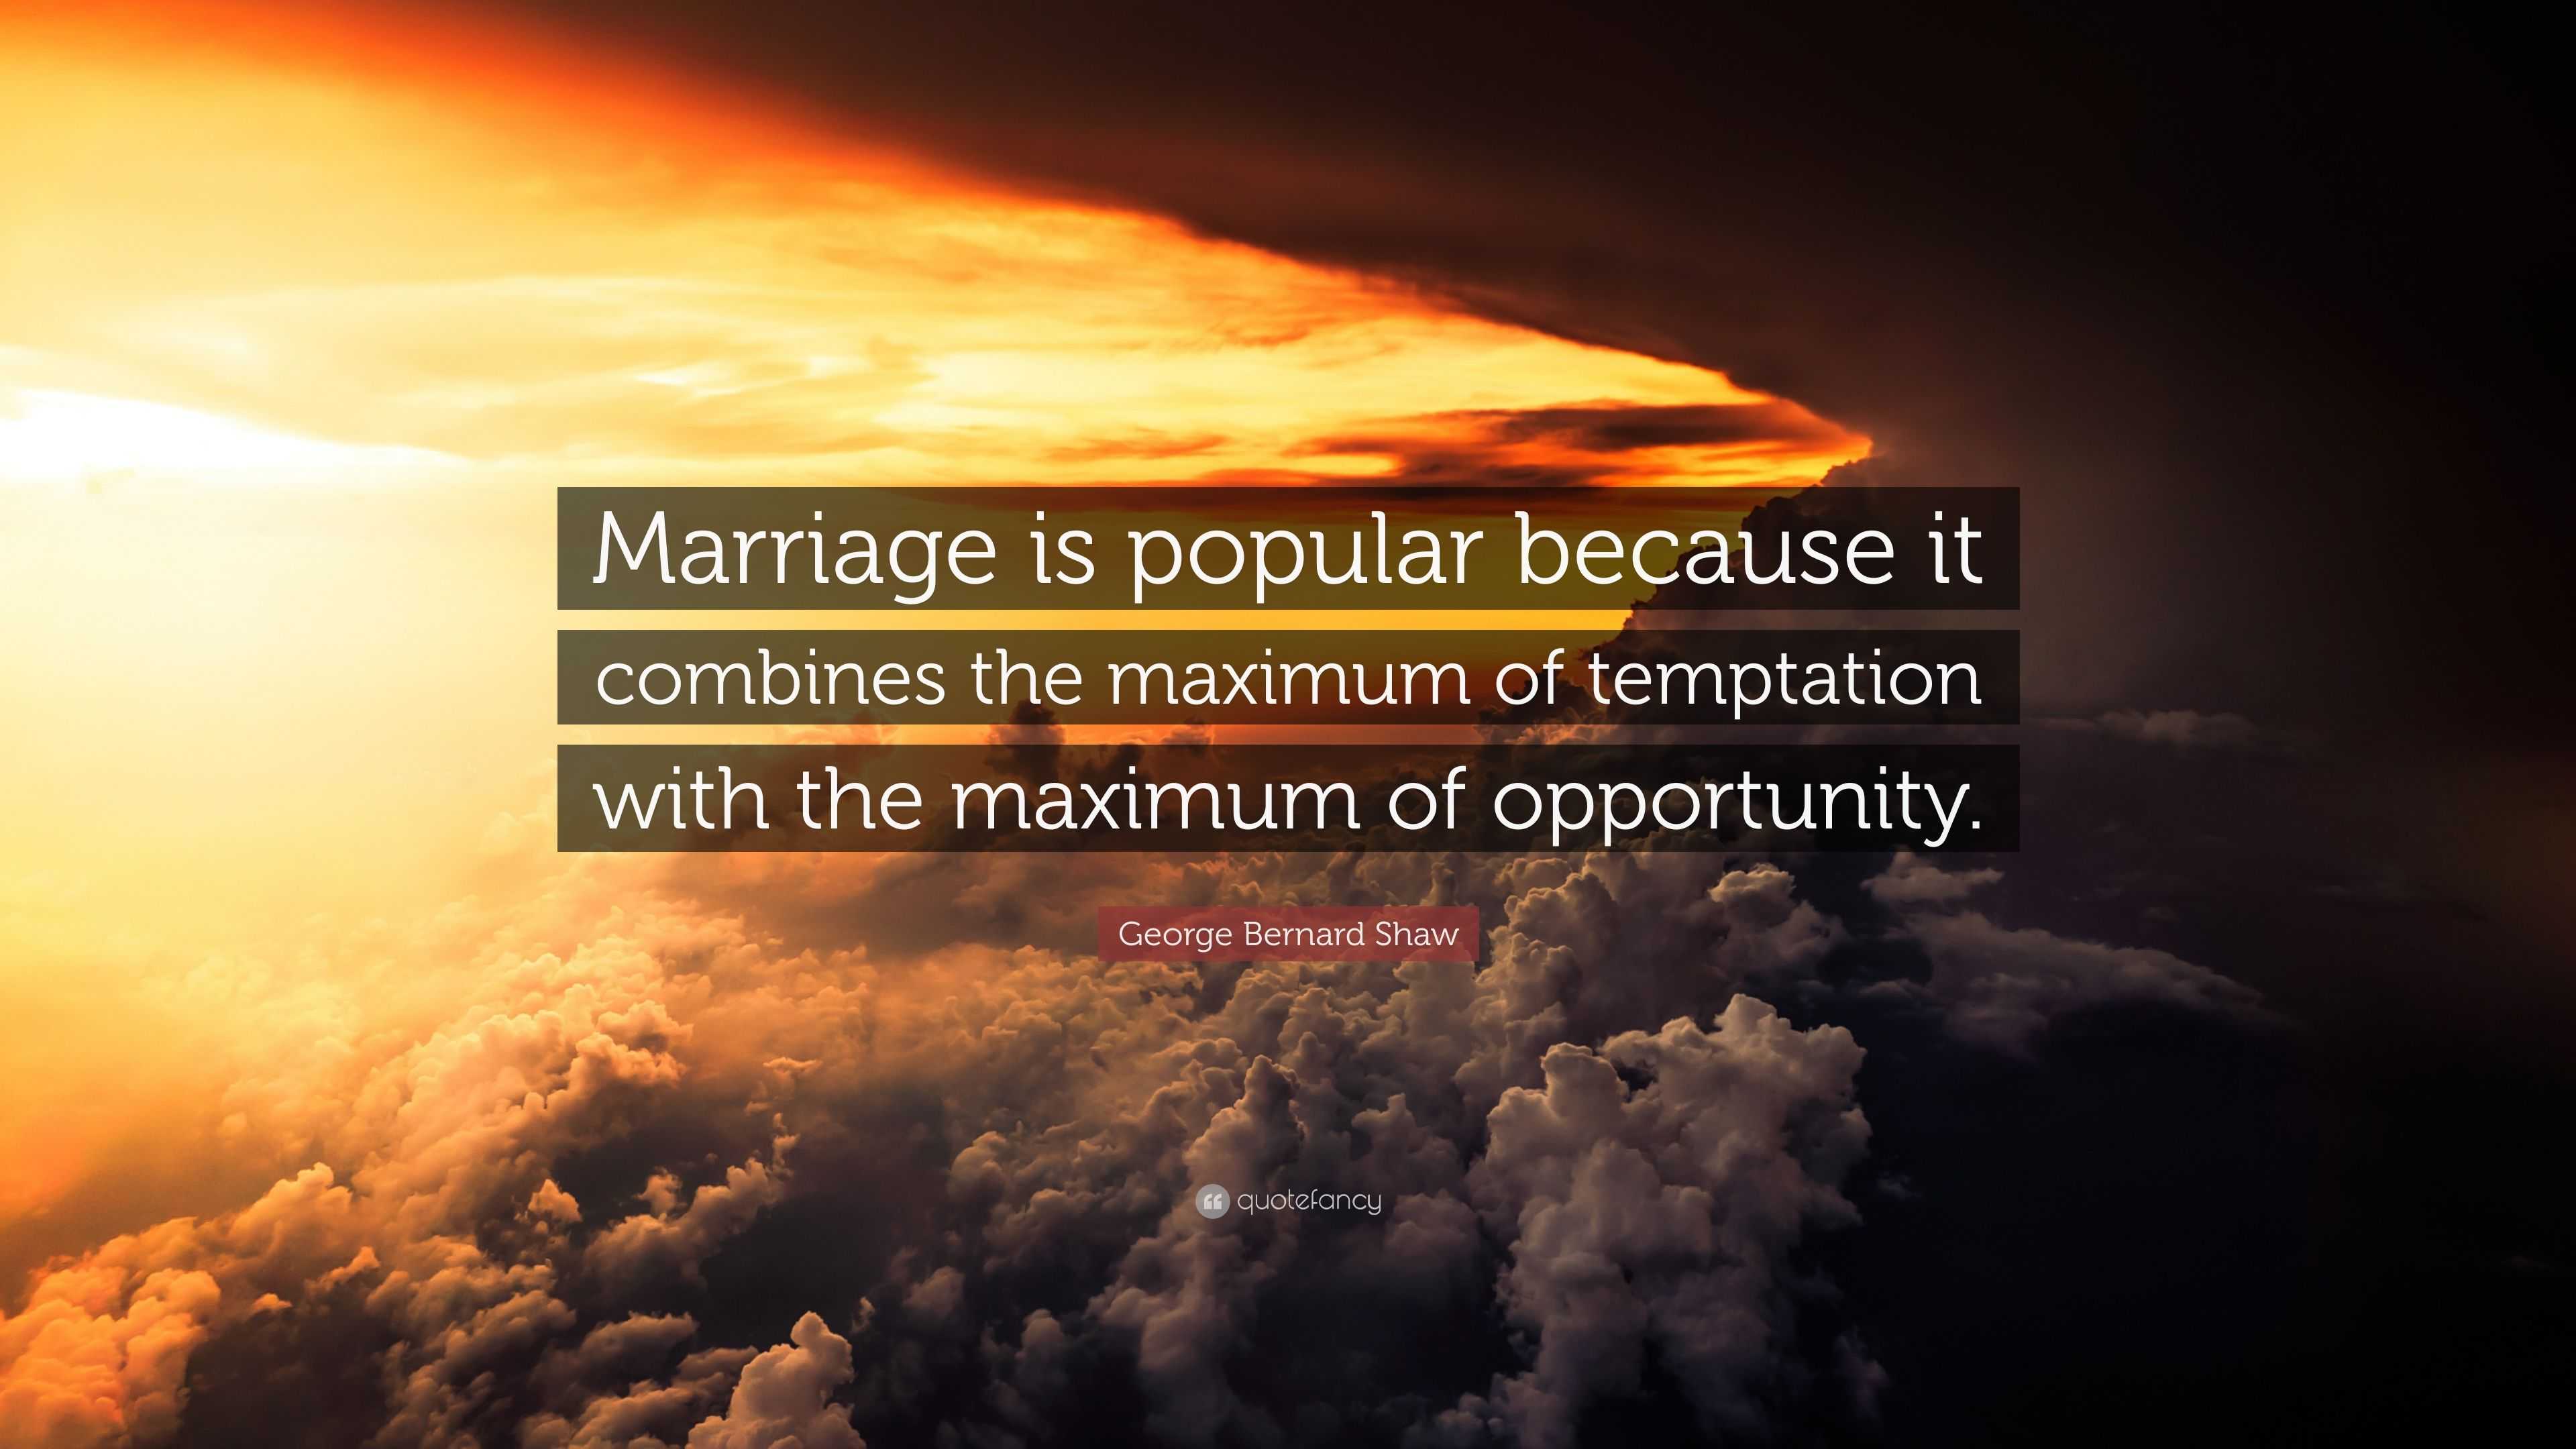 Great Bernard Shaw Quotes On Marriage of the decade Check it out now 